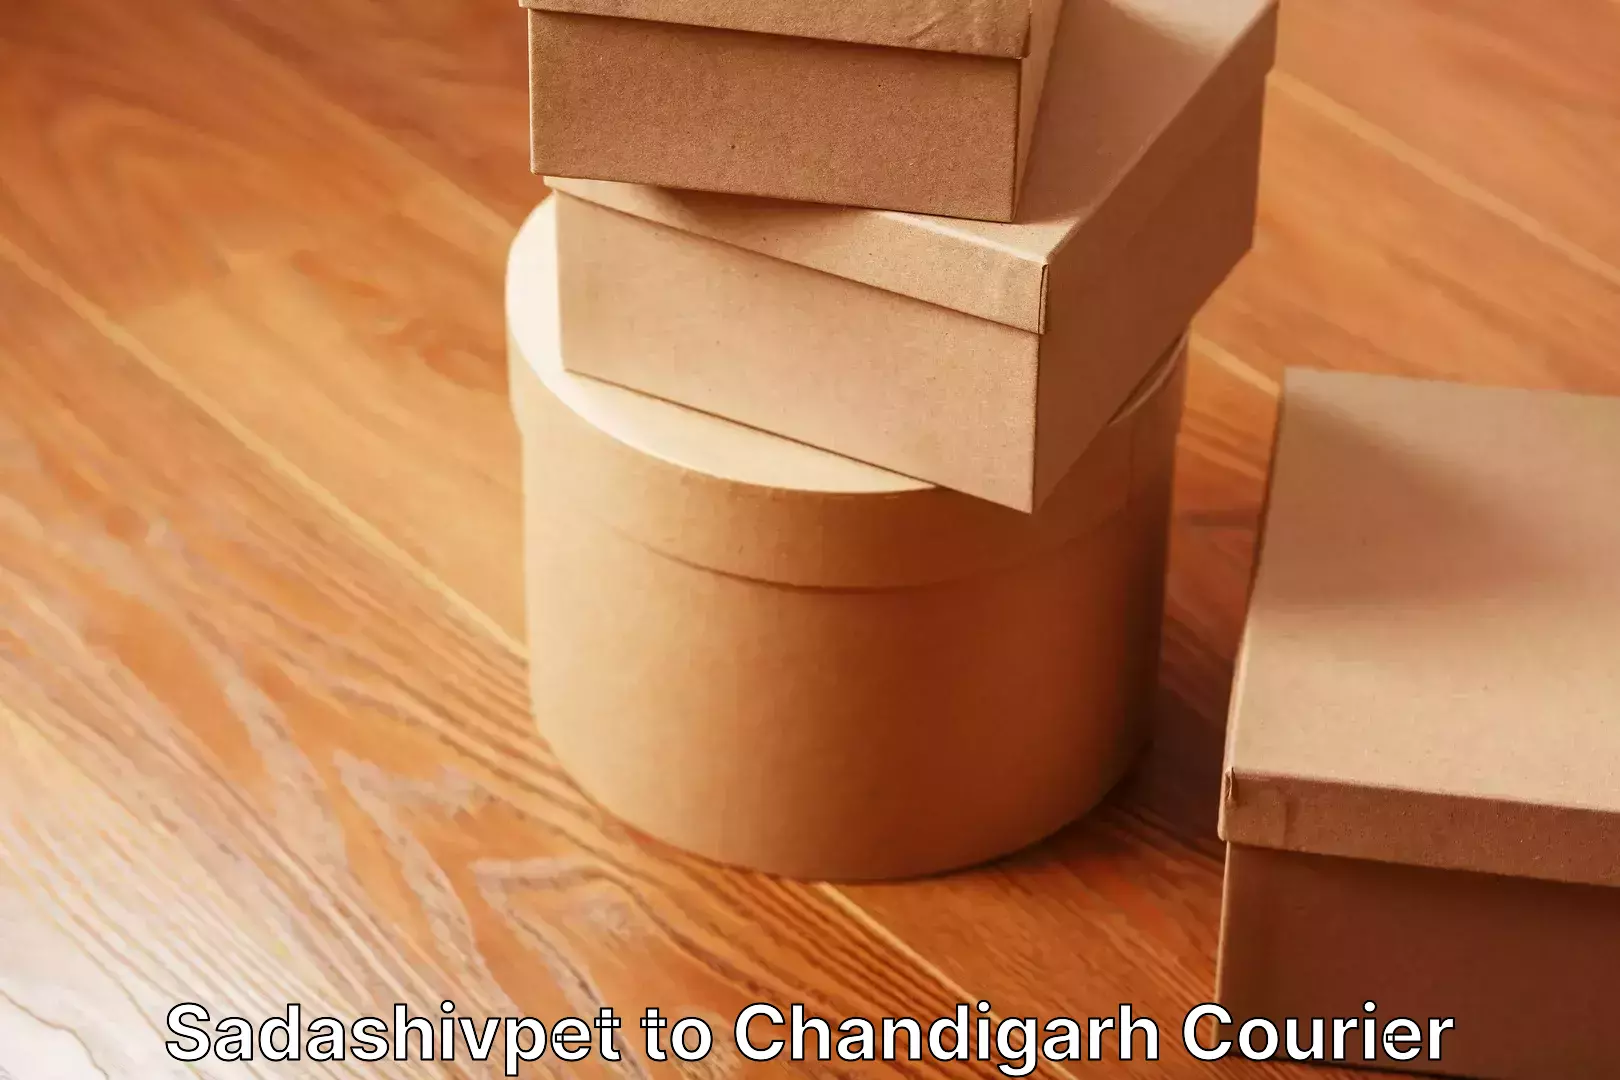 Professional movers and packers Sadashivpet to Chandigarh